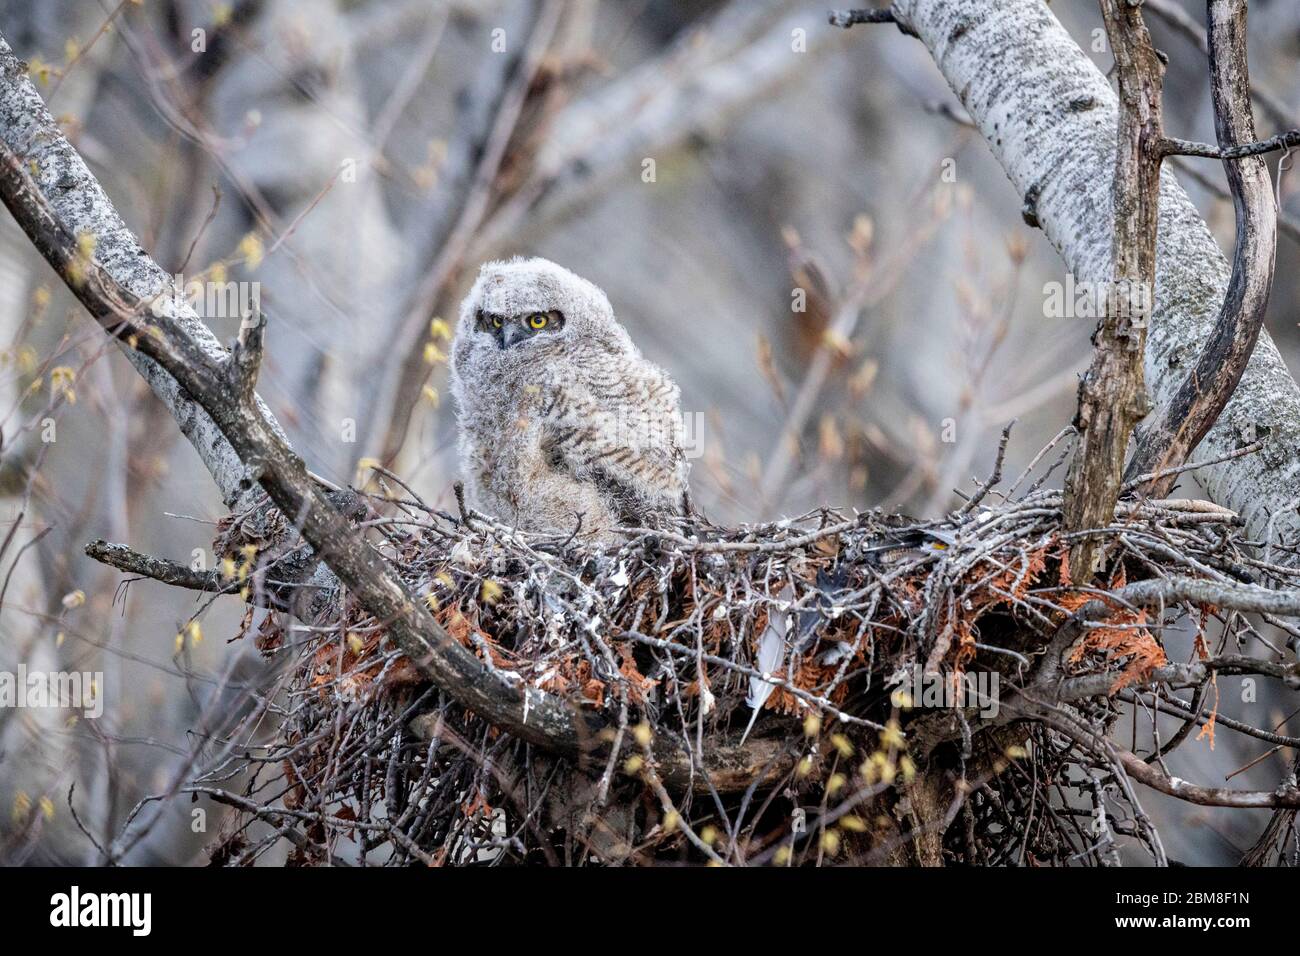 A wild nestling Great Horned Owlet (Bubo Virginianus), approximately 3-4 weeks old, part of the Strigiformes order, and Strigidae family. Stock Photo